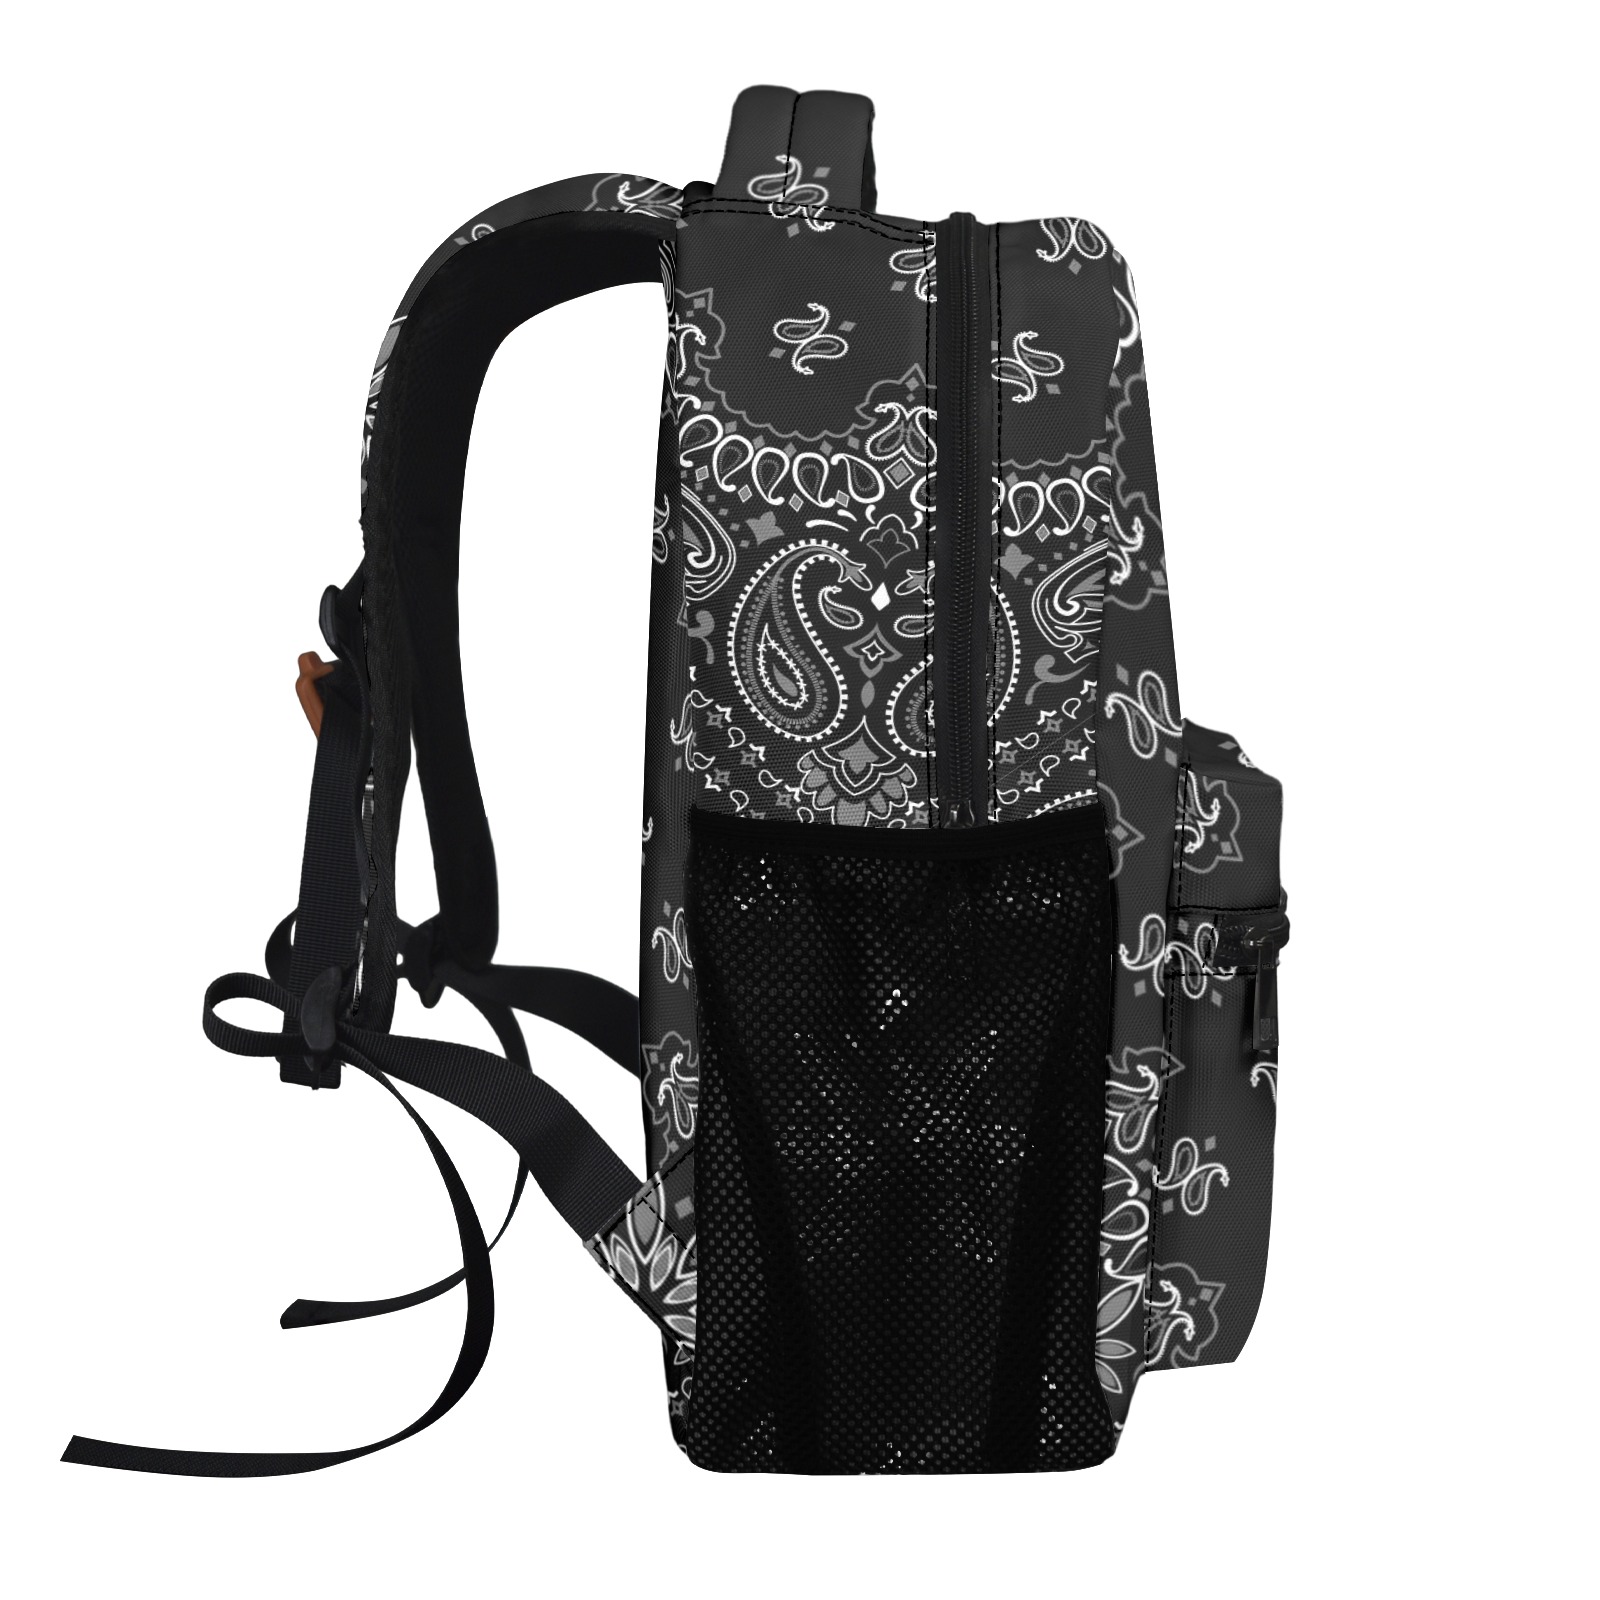 Bandanna Pattern Black White 17-inch All Over Print Casual Backpack